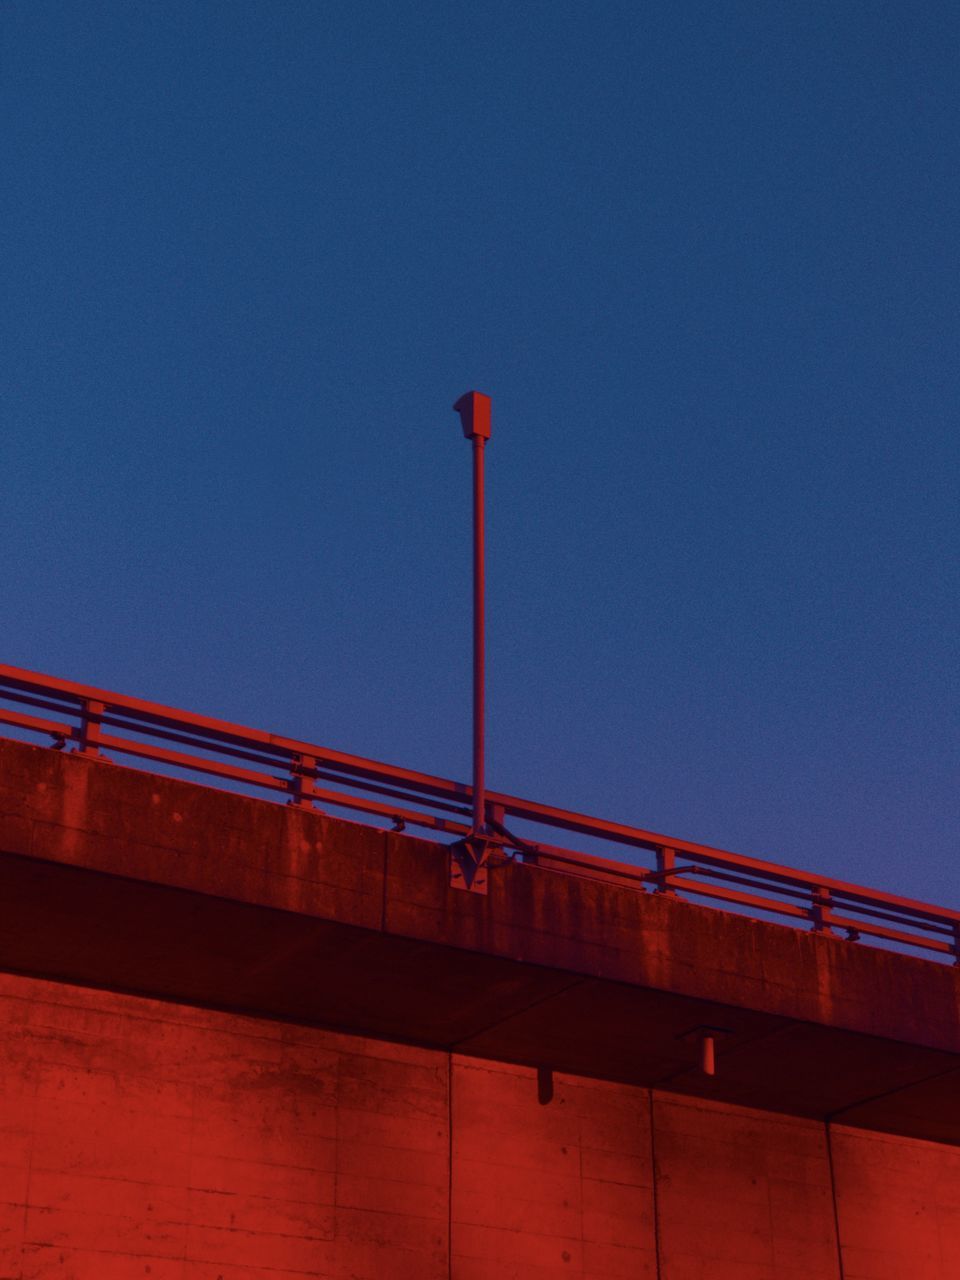 red, architecture, sky, built structure, transportation, clear sky, no people, bridge, evening, reflection, nature, line, blue, dusk, low angle view, light, building exterior, night, railing, outdoors, copy space, city